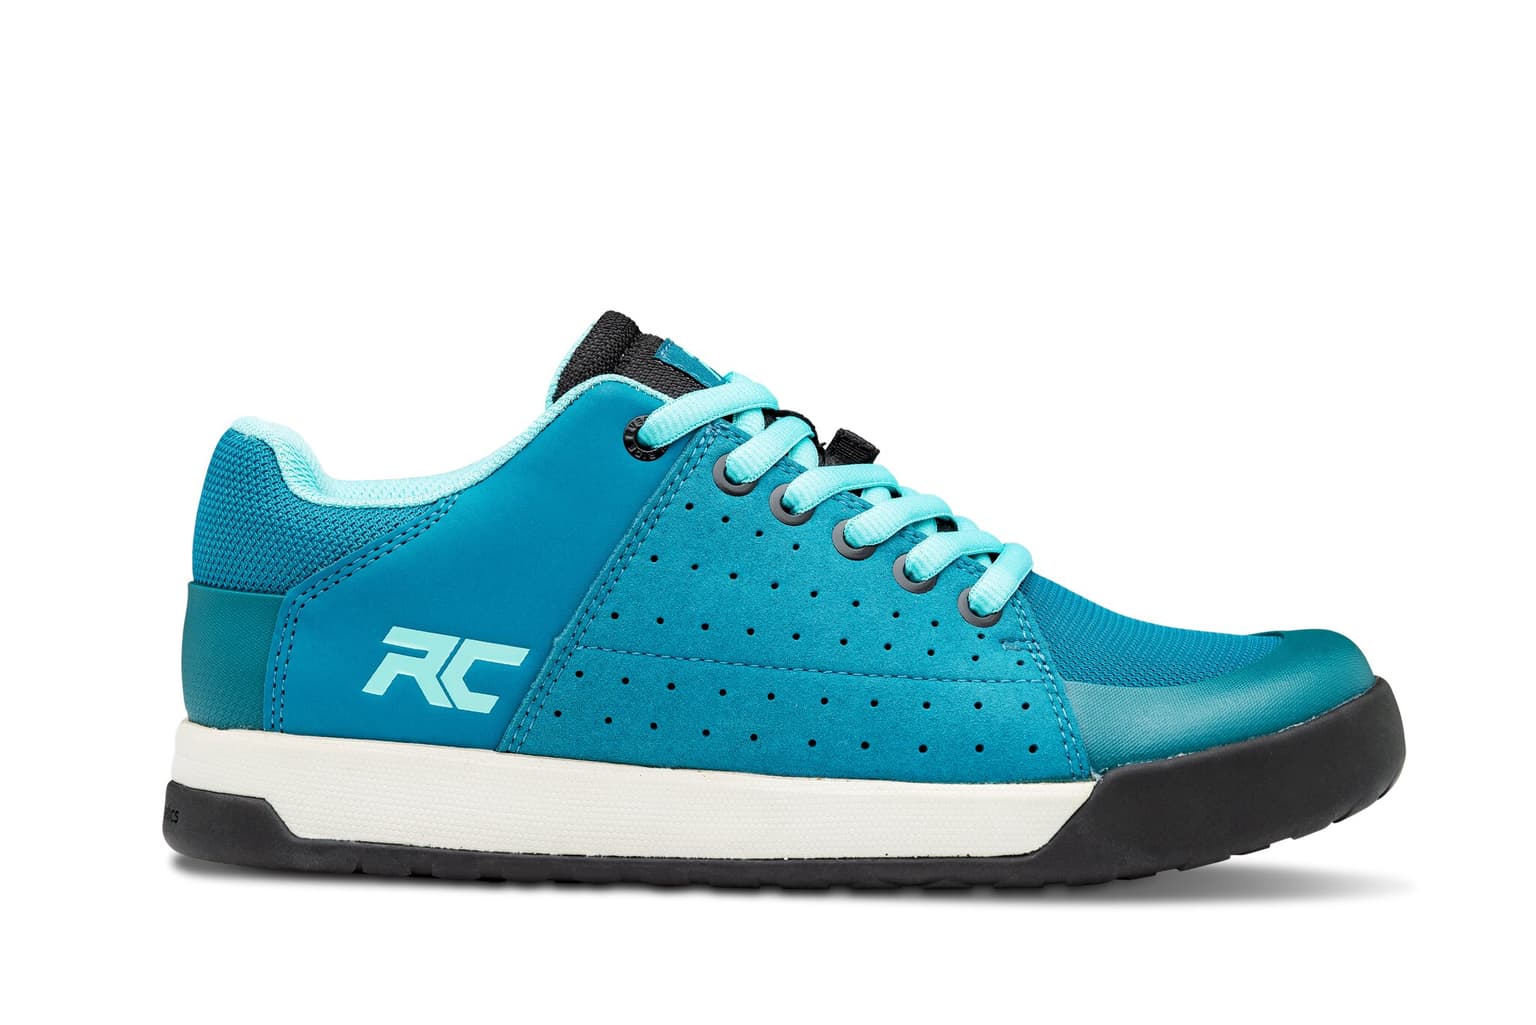 Ride Concepts Ride Concepts Livewire Veloschuhe turquoise 1